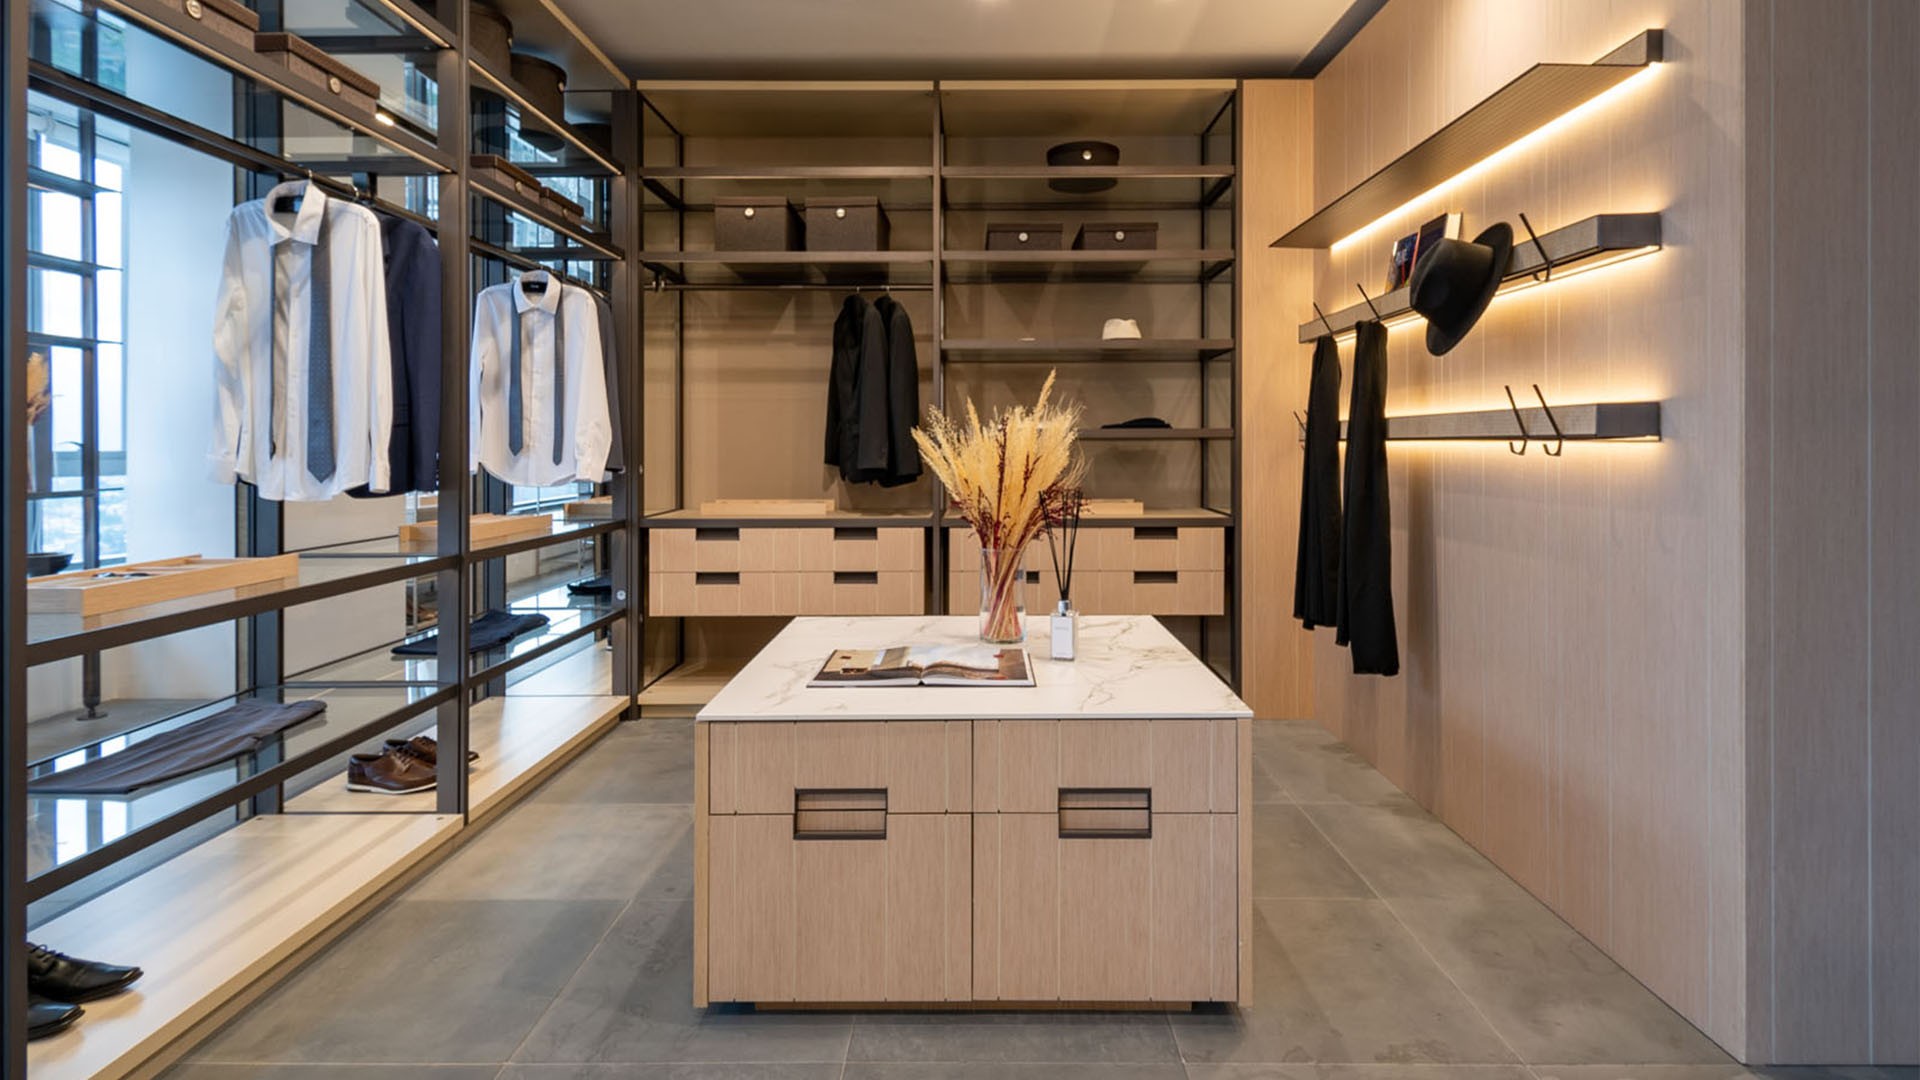 The most expensive wardrobes in the world cost the same as a house